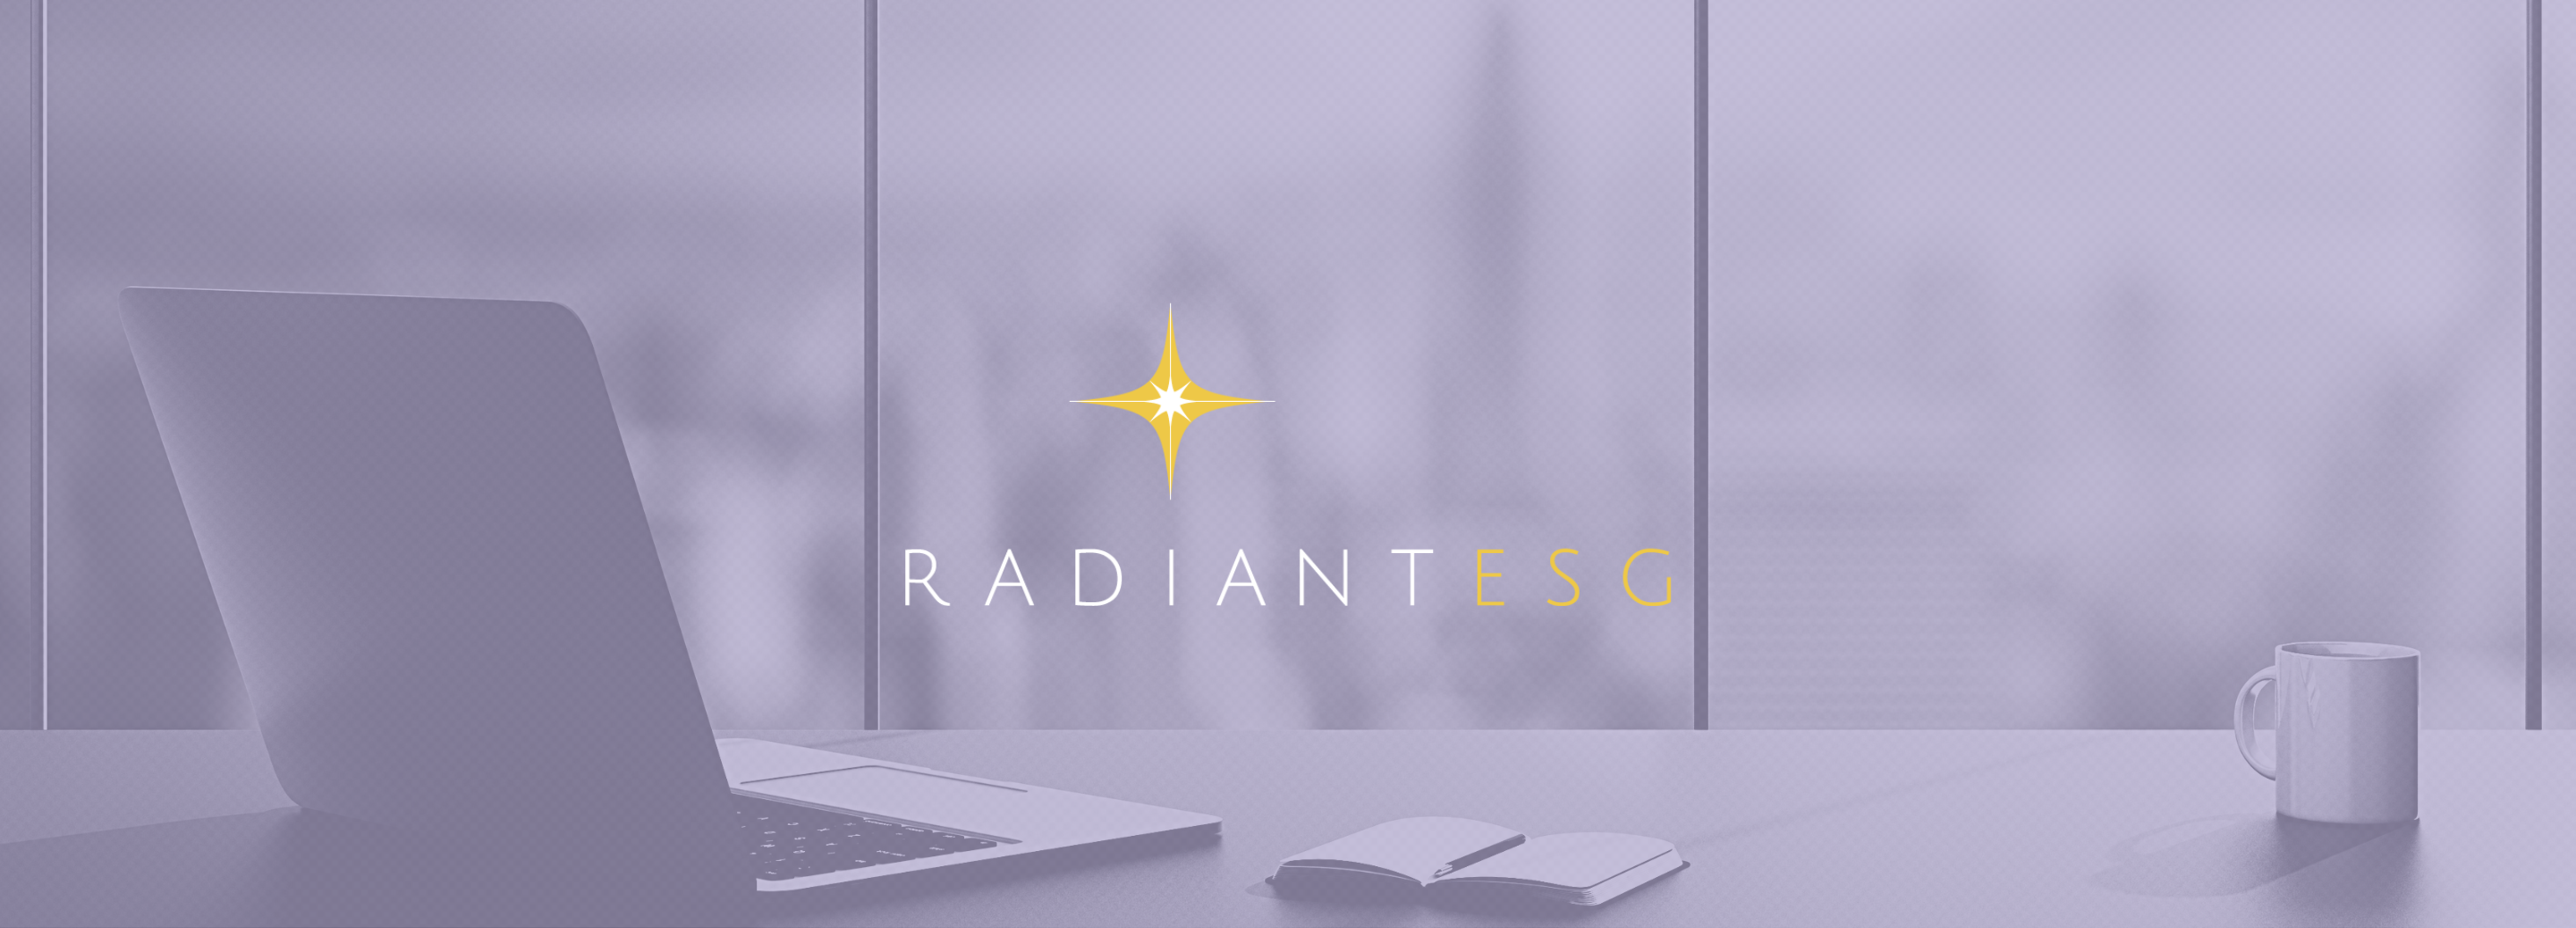 New Investment Manager Radiant Has ESG In Its DNA